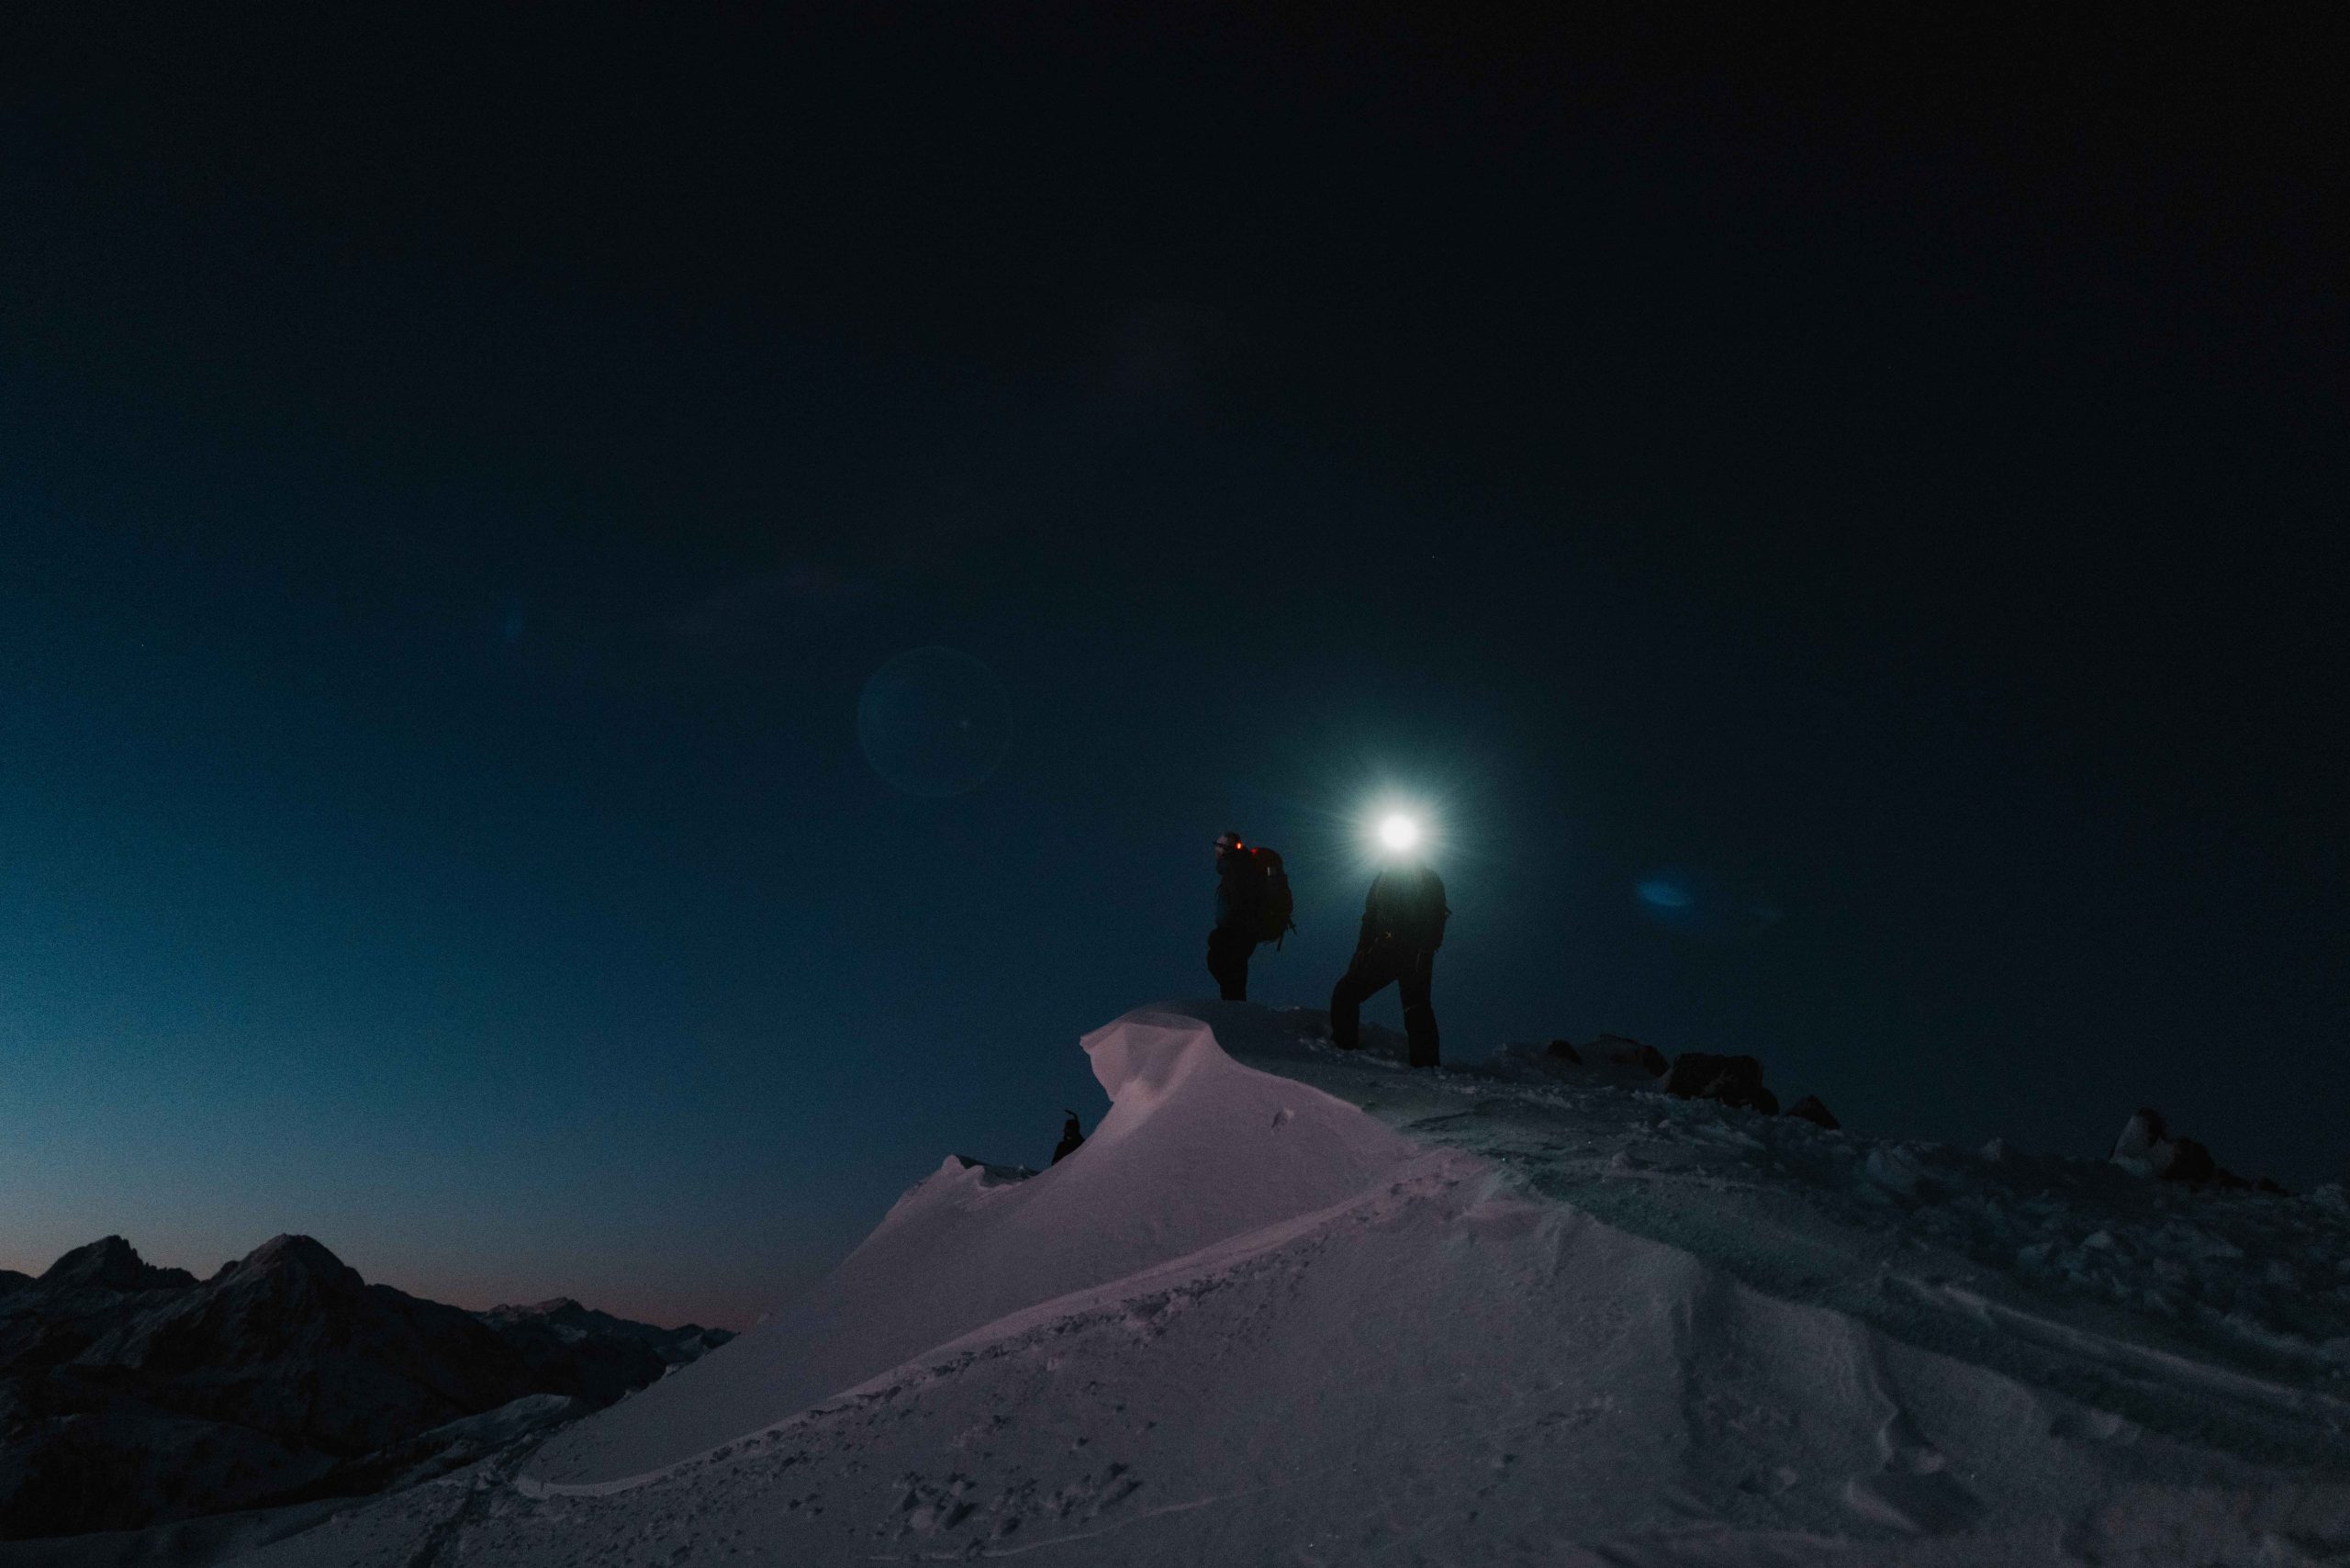 Two mountain climbers standing on top a mountain edge with strong headlamps.